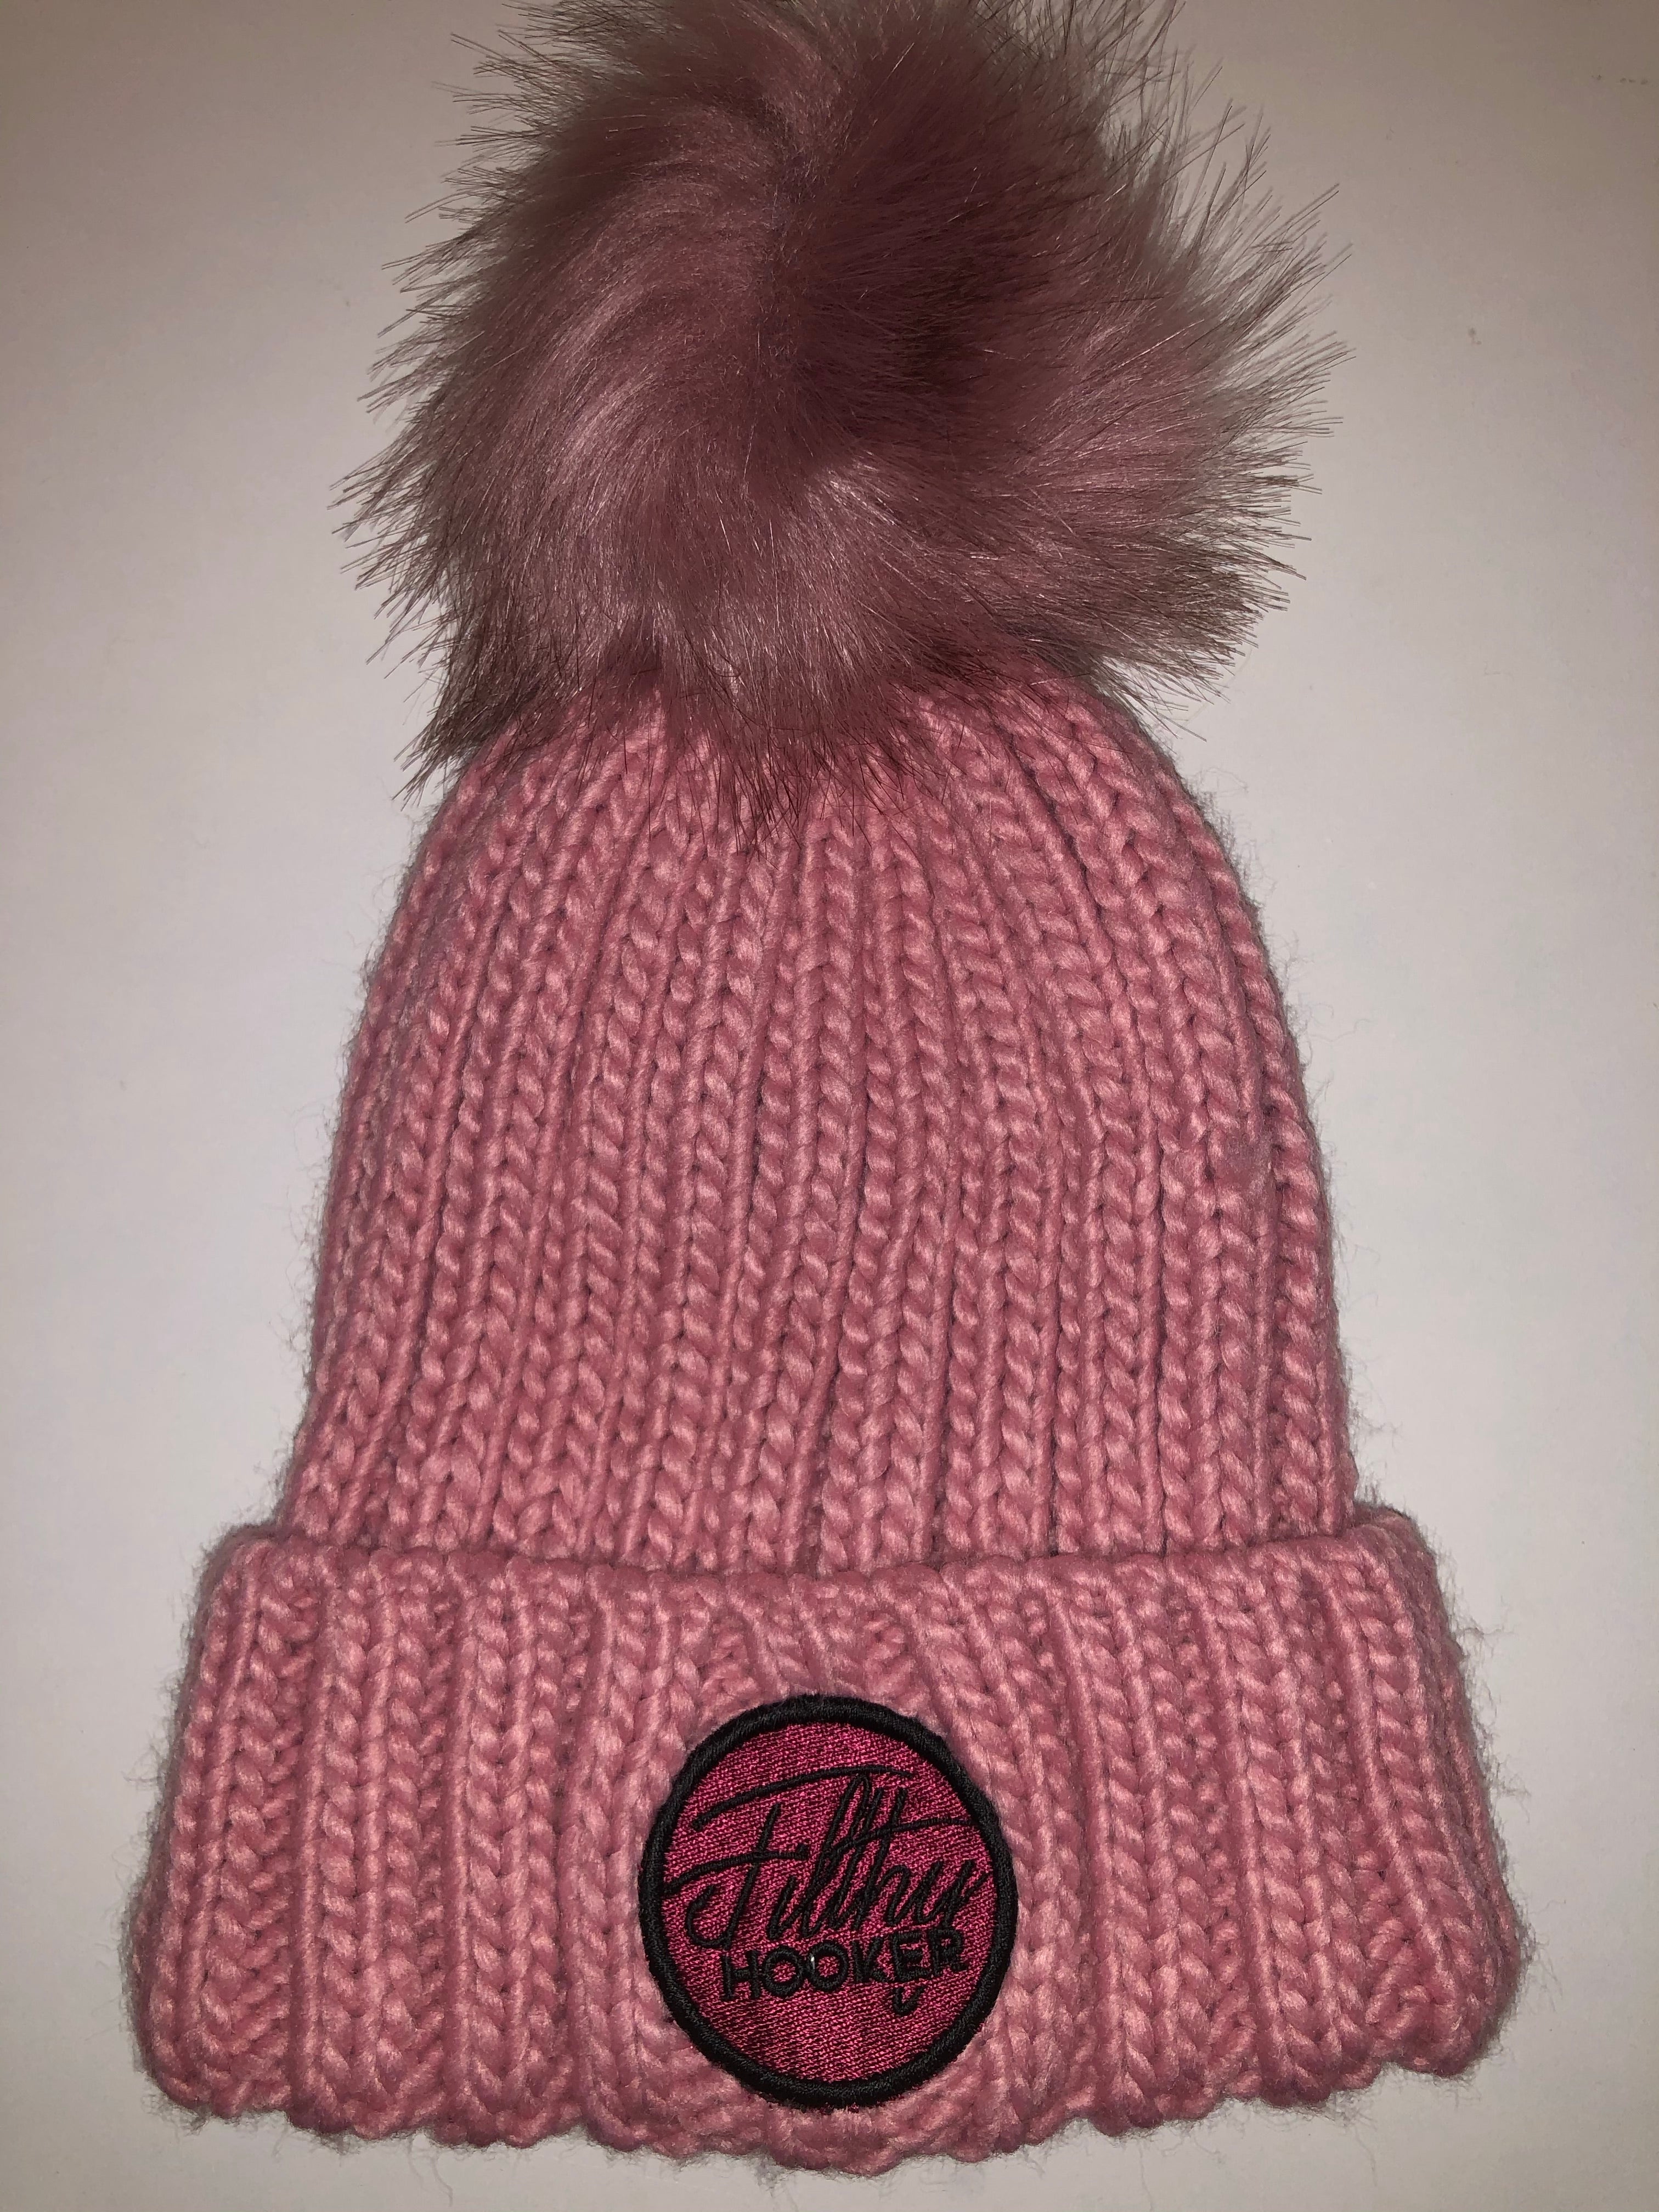 Pink & Olive ribbed beanies with detachable faux fur bobble so you can have it with or without. Easy to detach and attach. Very very warm. Perfect for those cold sessions on the bank.